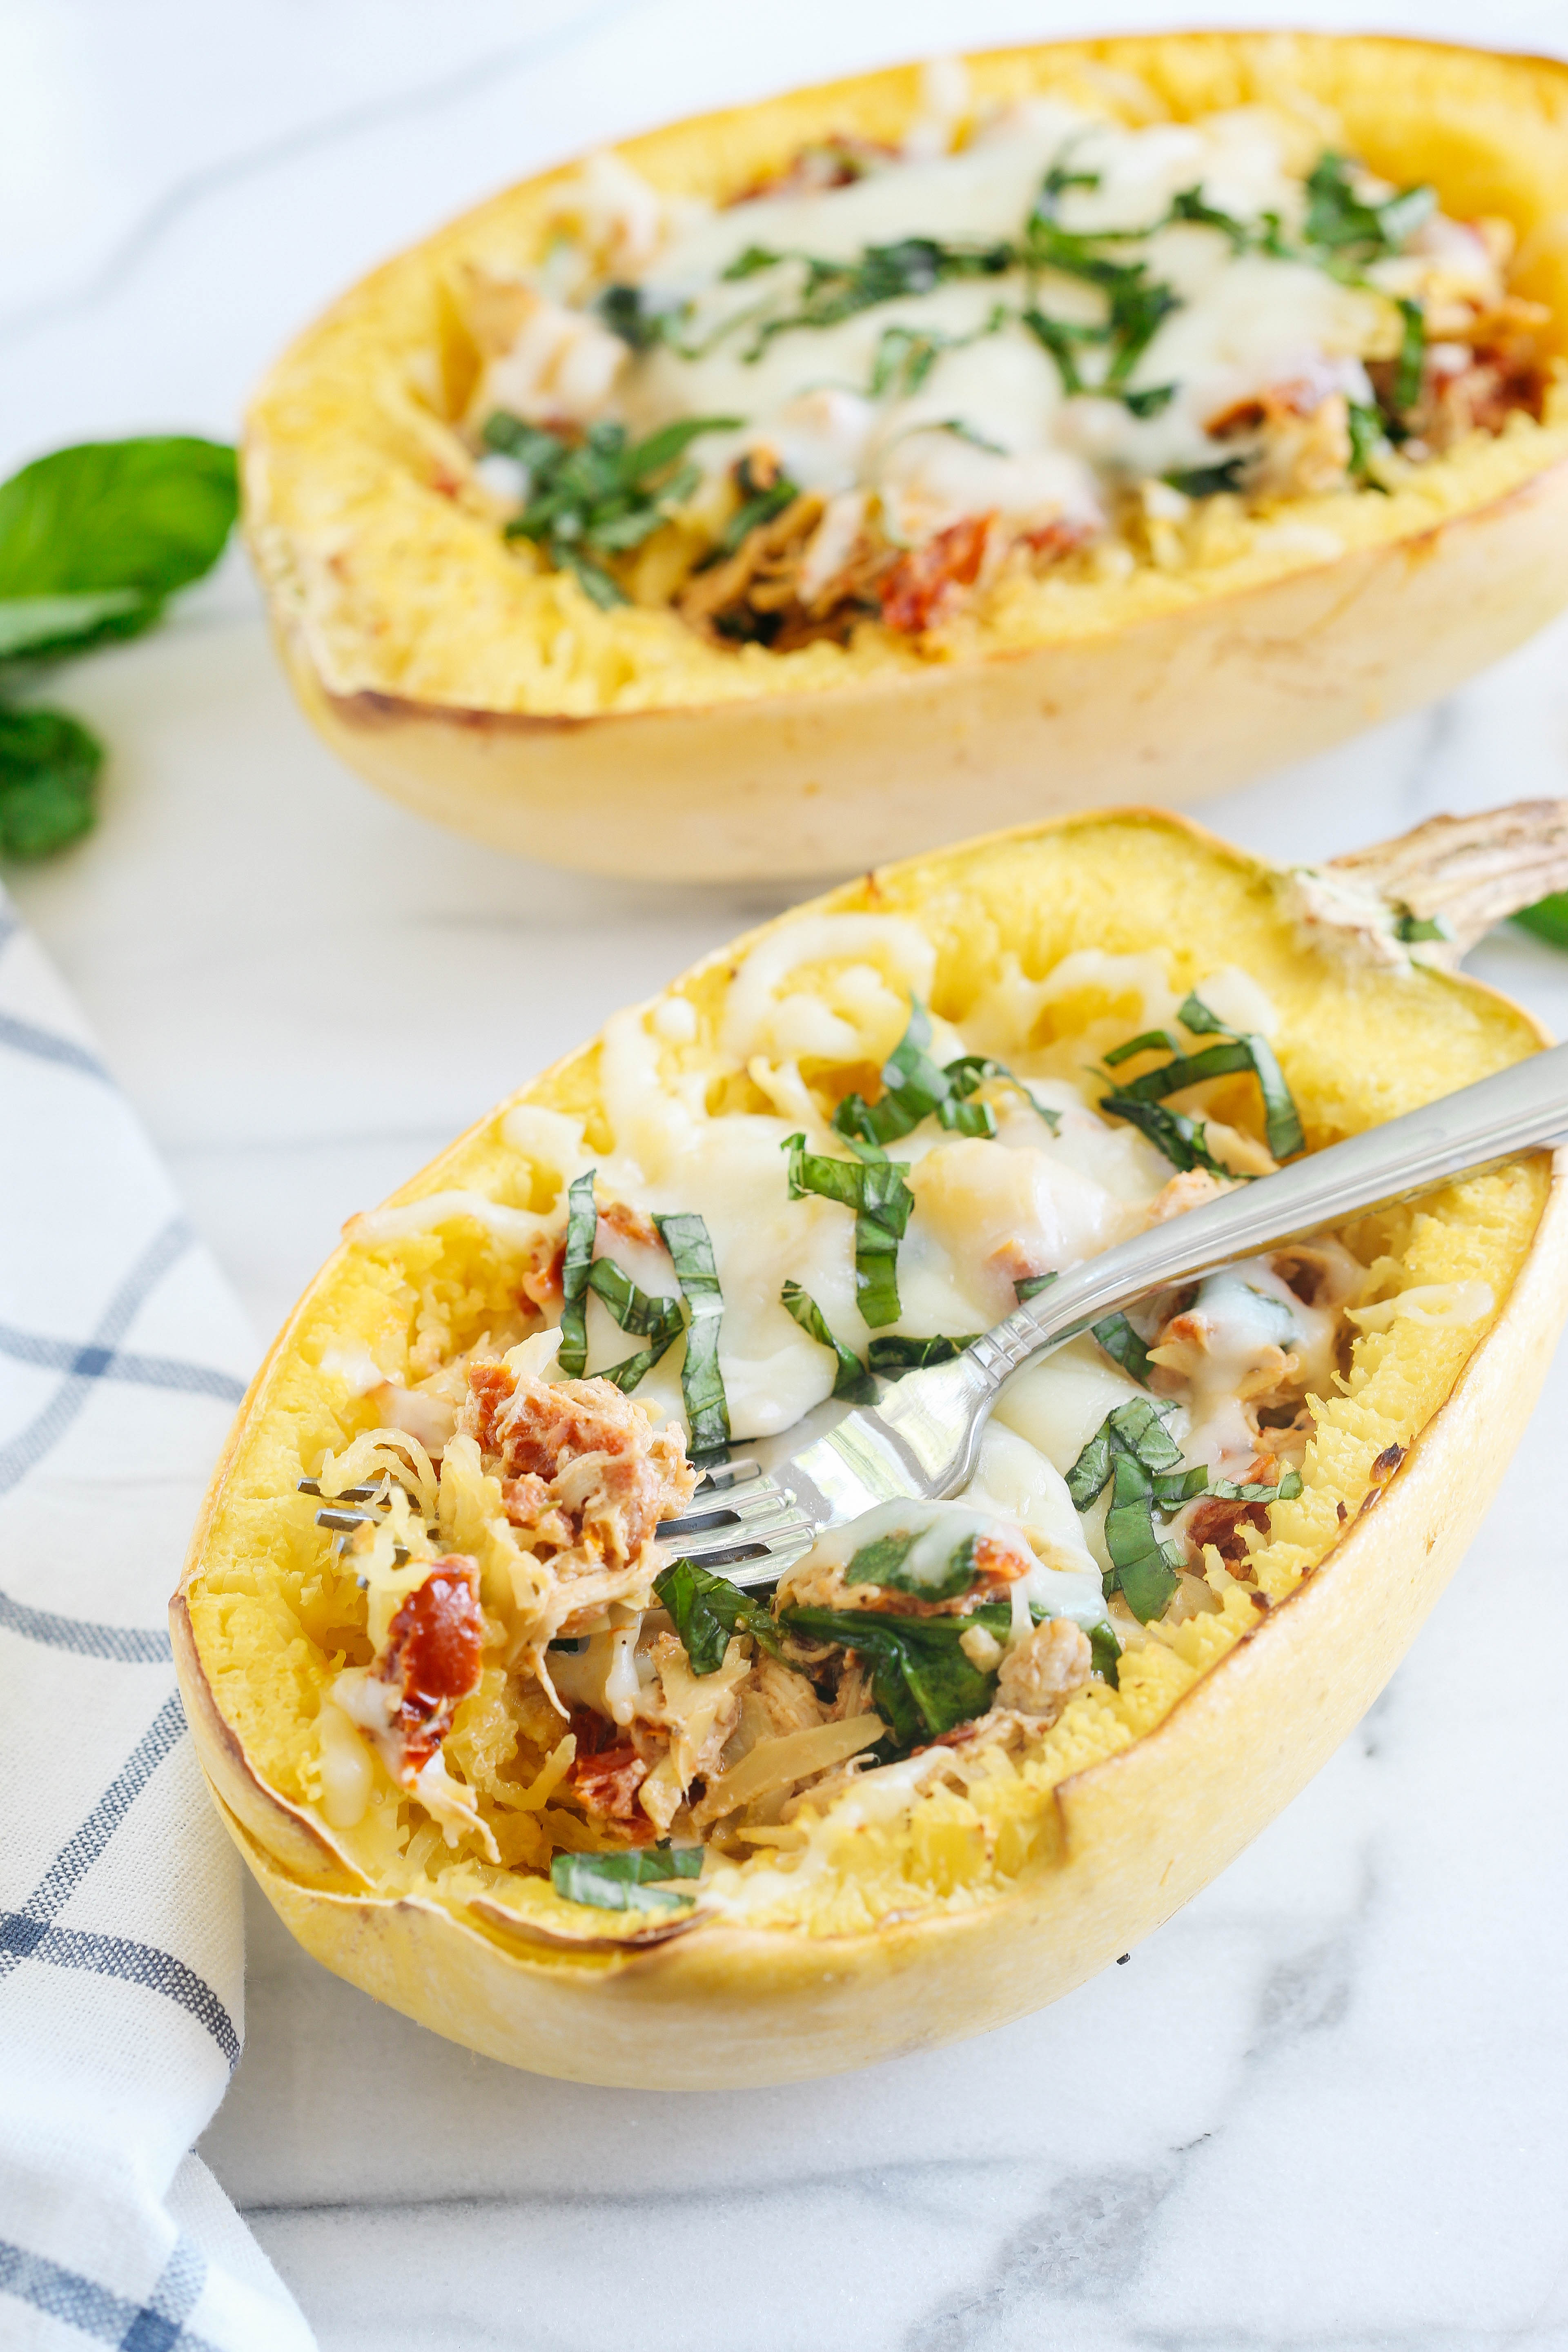 These Sun Dried Tomato and Artichoke Spaghetti Squash Boats are cheesy, delicious and make the perfect weeknight comfort meal that you can enjoy guilt-free! 